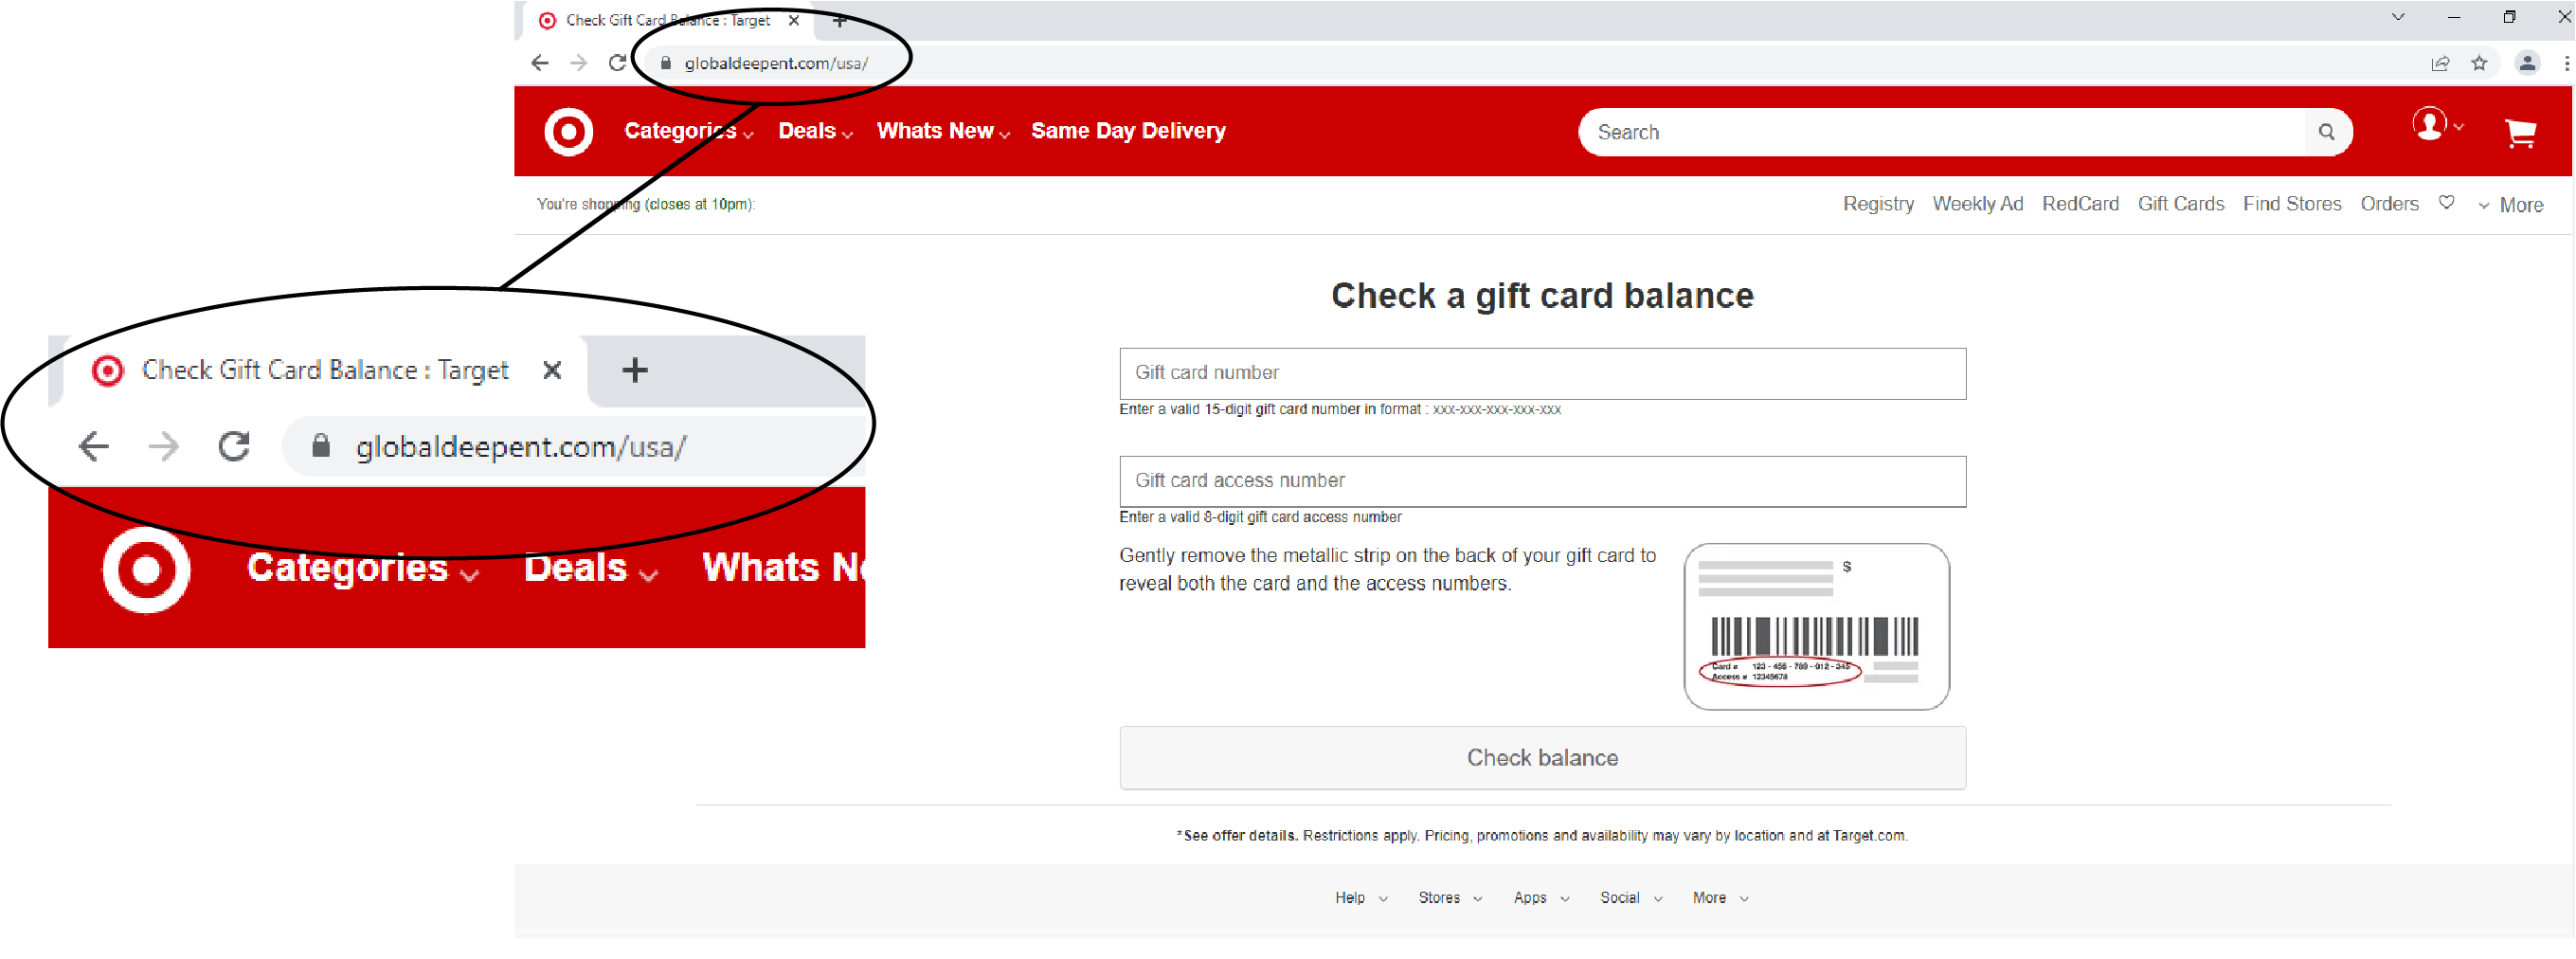 A fraudulent website pretending to be Target.com. It looks very similar to Target's official website,  but the actual URL of the site that is displayed in the browsers address bar is not Target.com